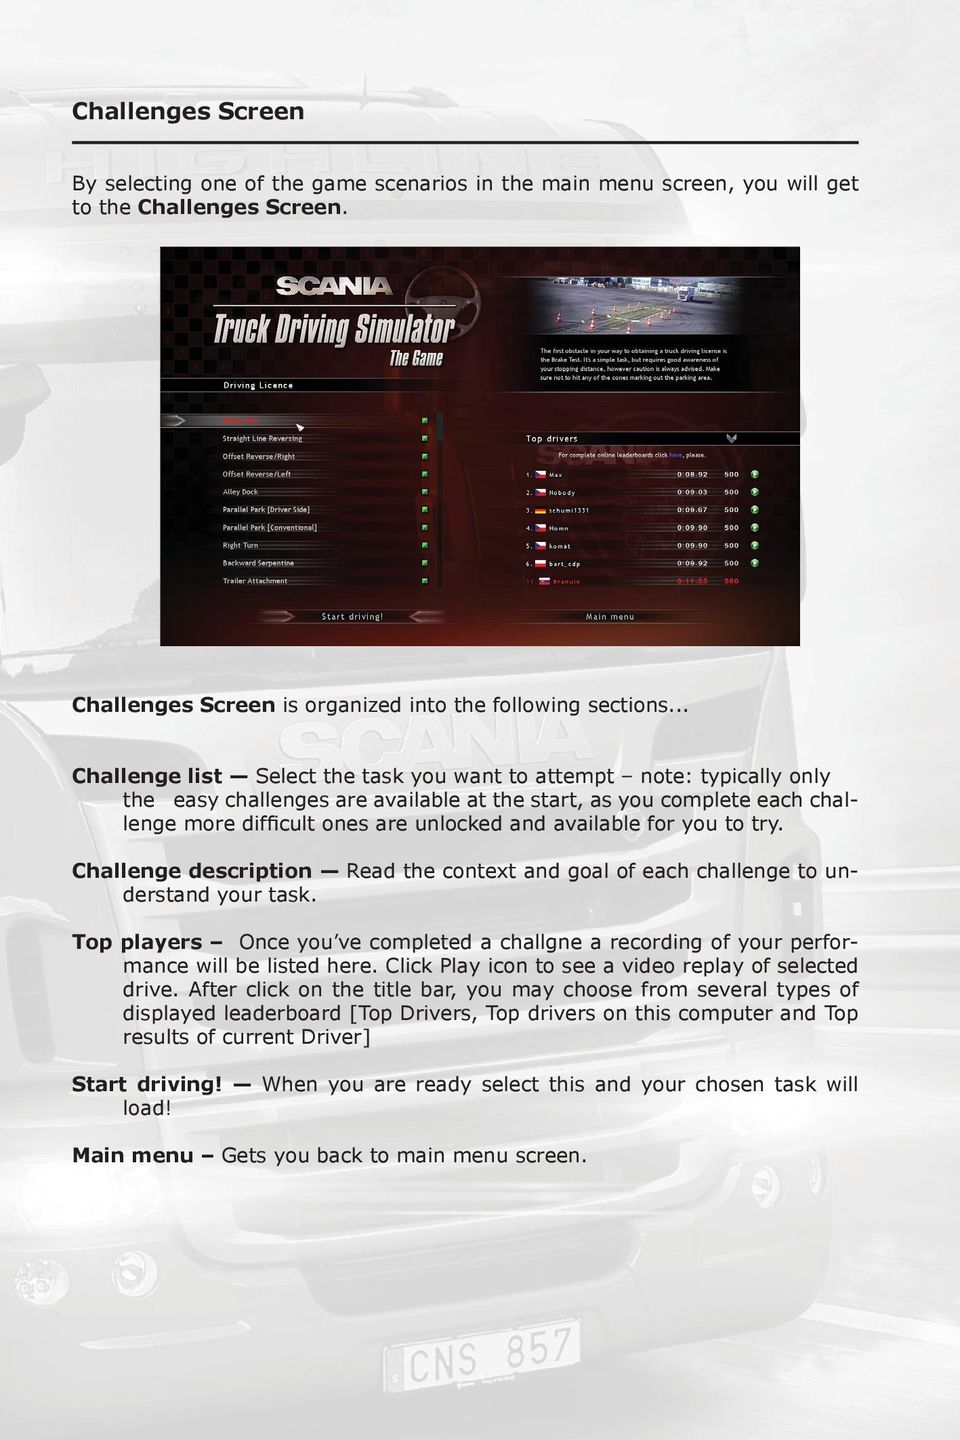 available for you to try. Challenge description Read the context and goal of each challenge to understand your task.